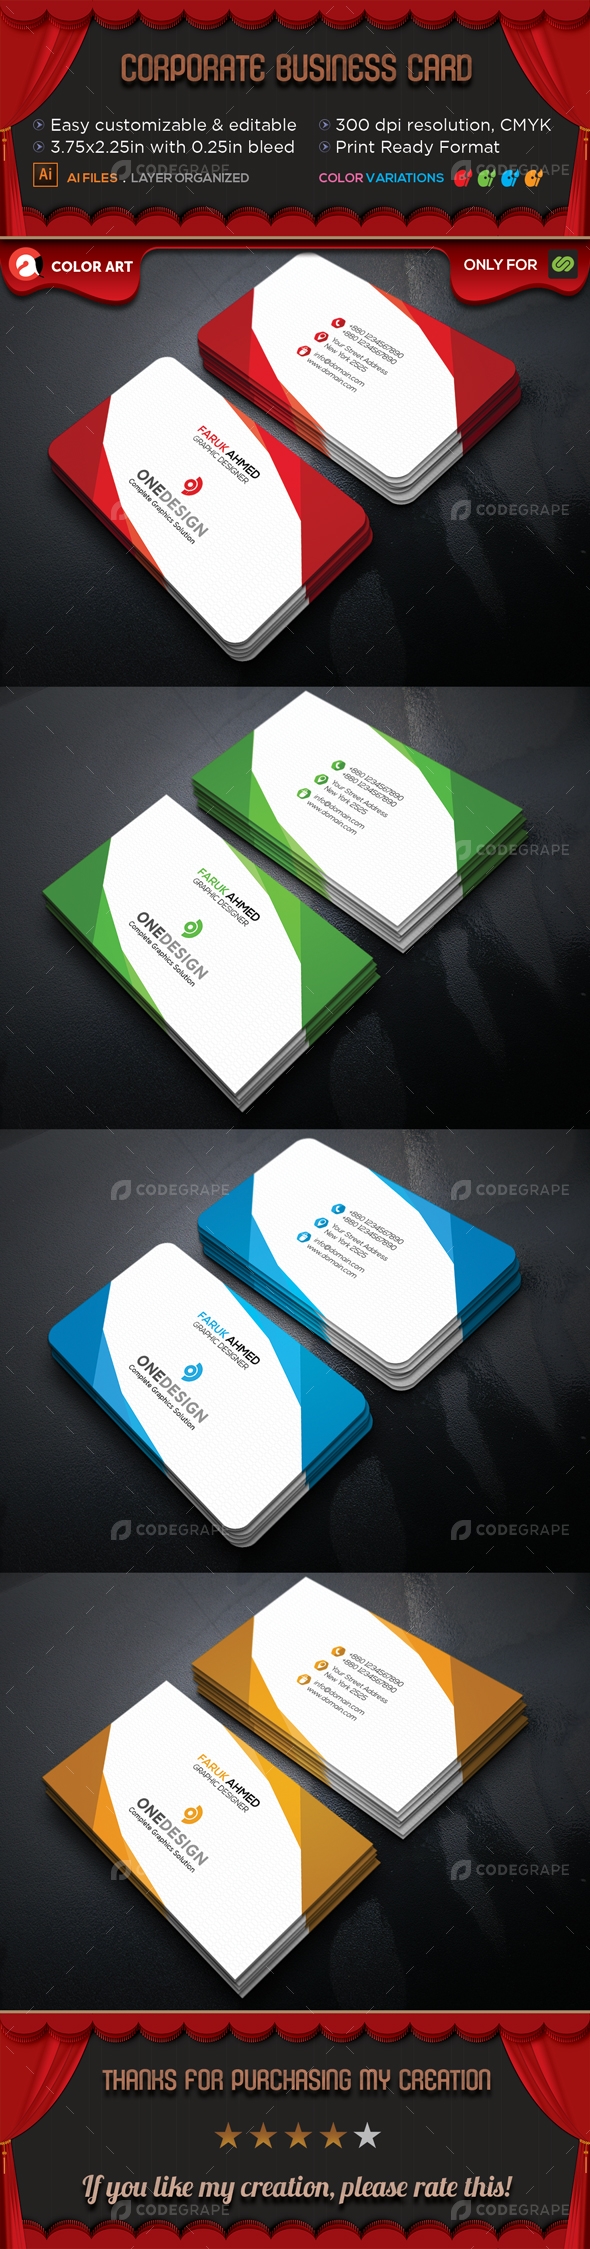 Corporate Business Card V.9